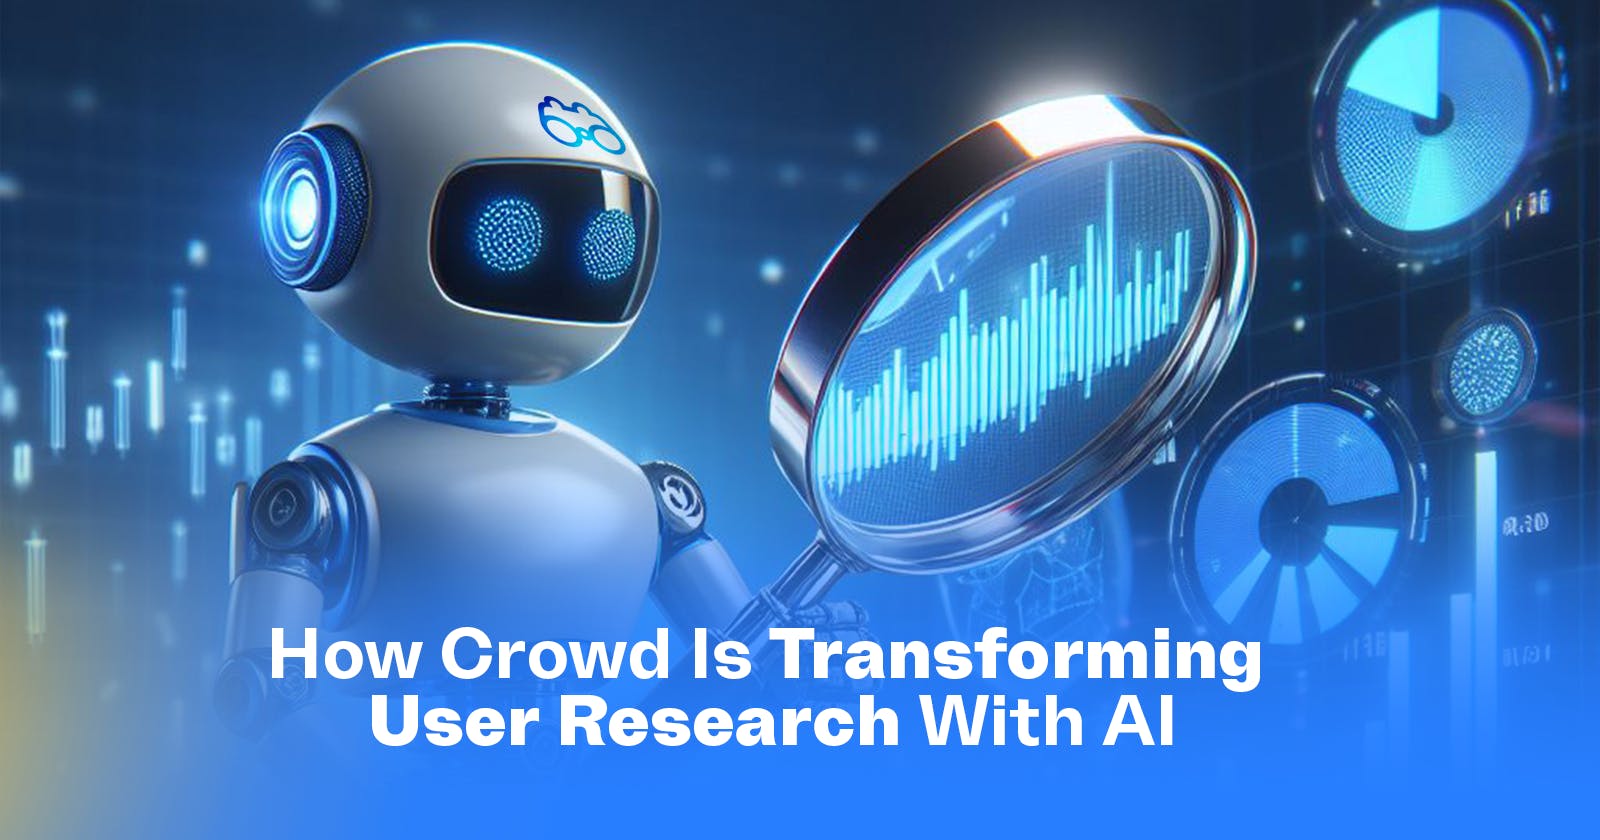 How Crowd Is Transforming User Research with AI